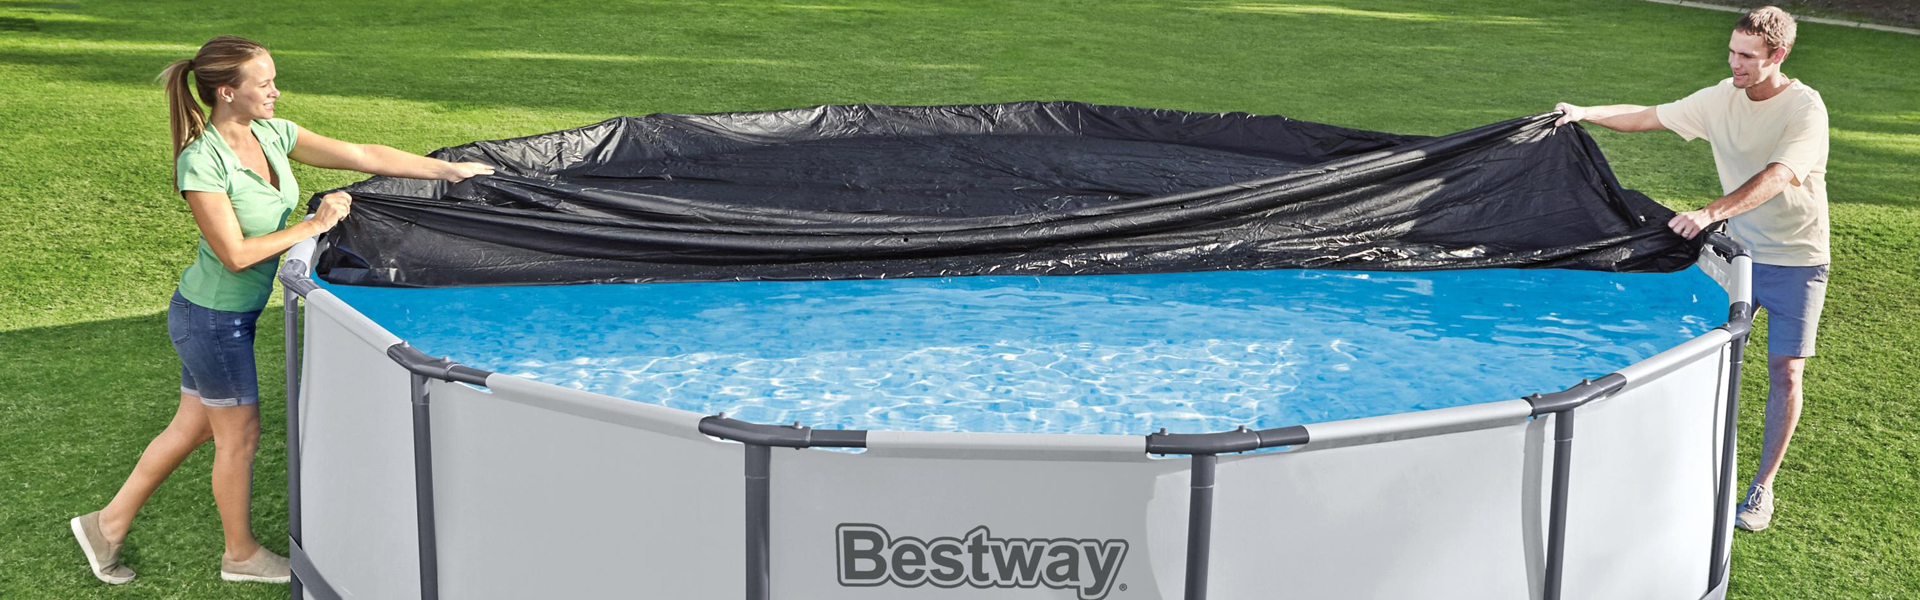 Swimming Pool Covers, Pool Protective Covers